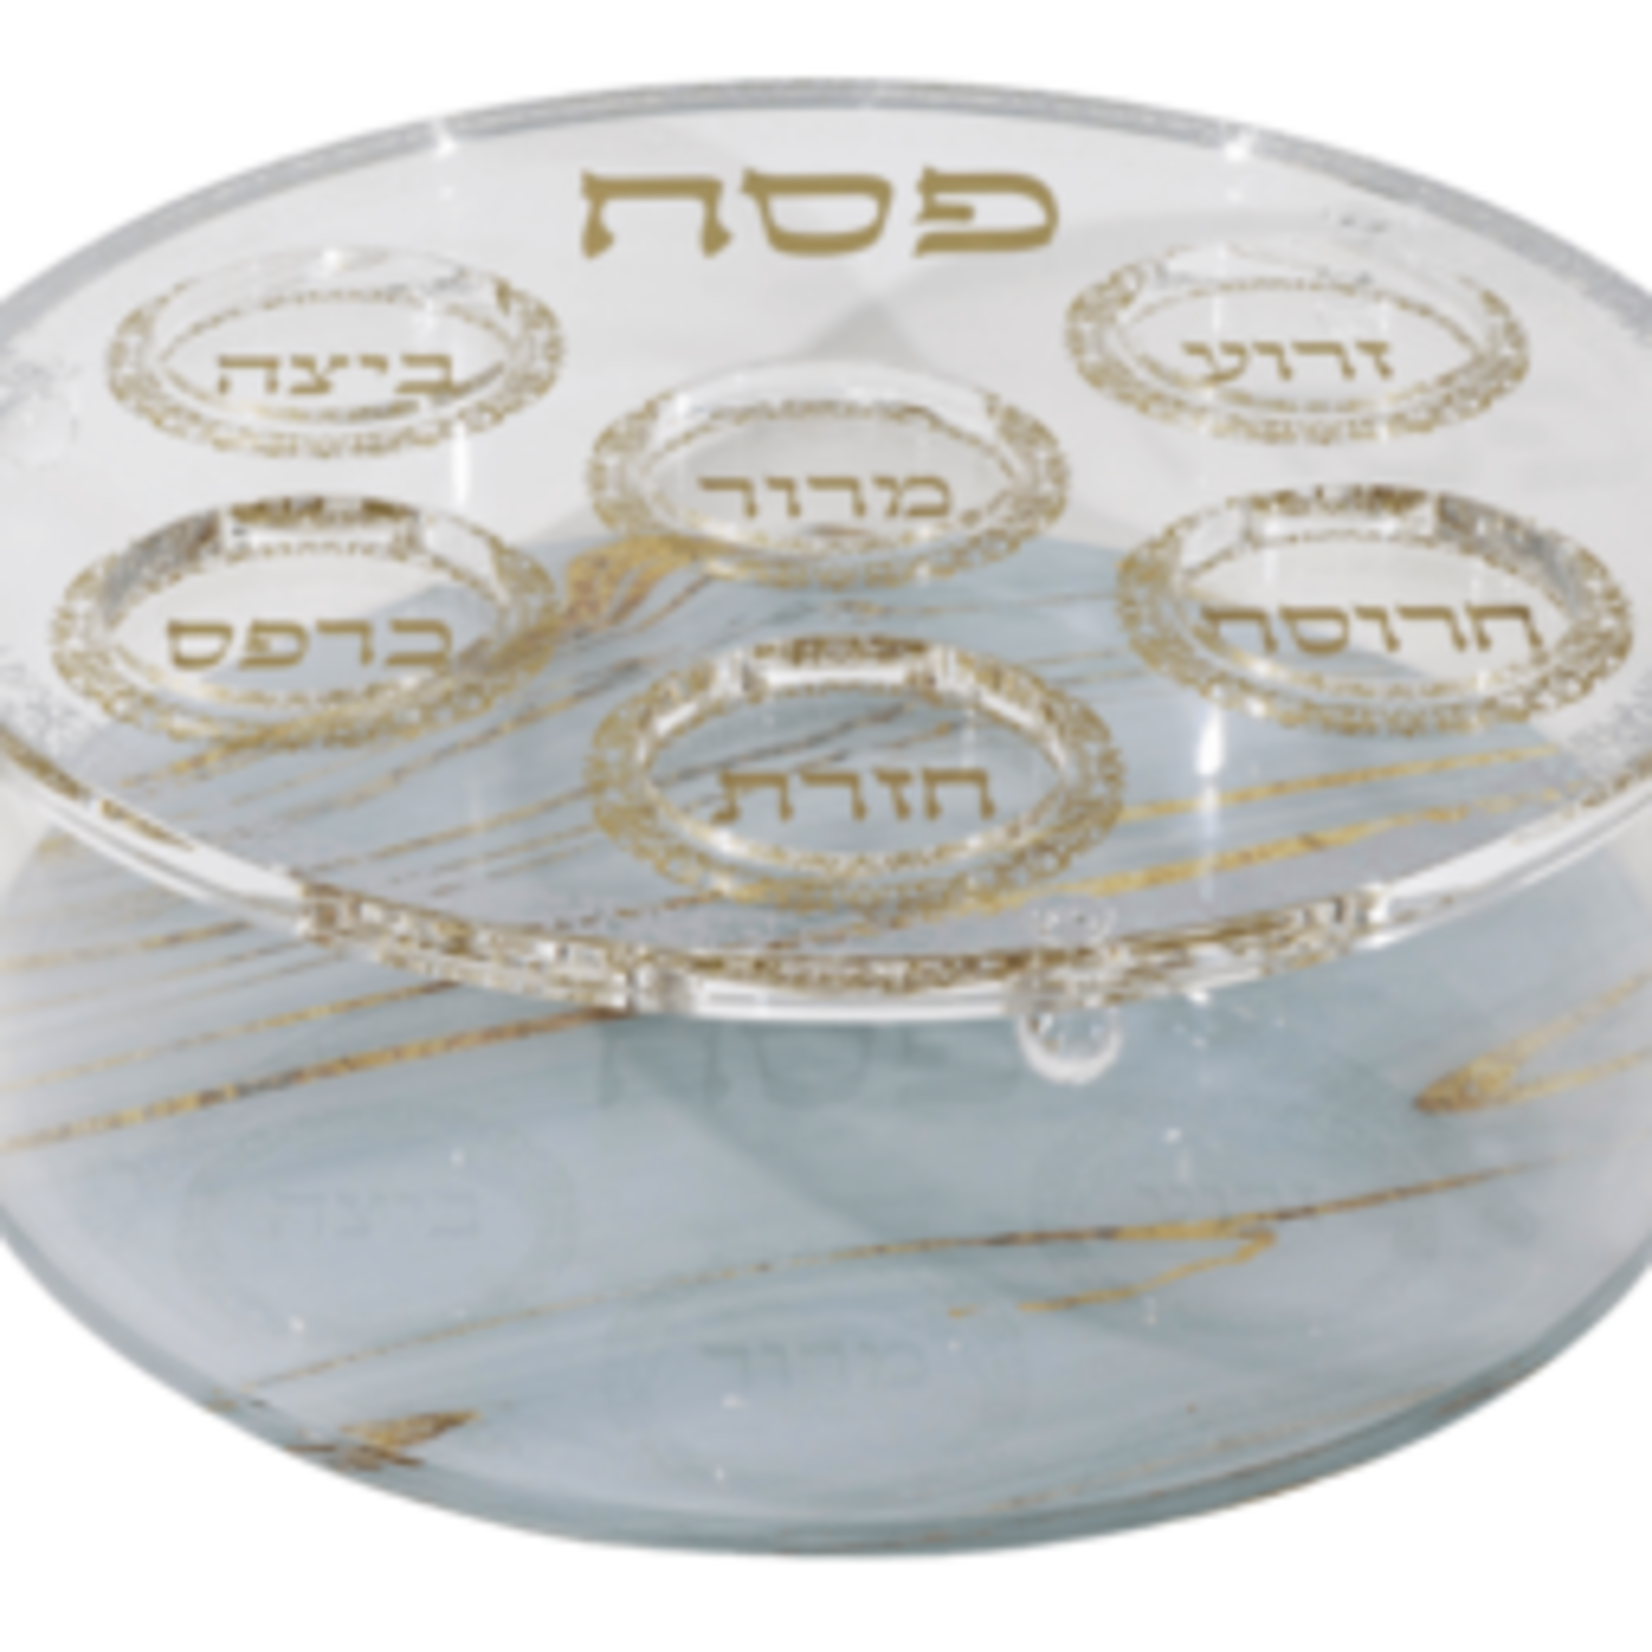 182700 Acrylic Round Matza Box With Seder Plate Cover - Grey & Gold Marble Design